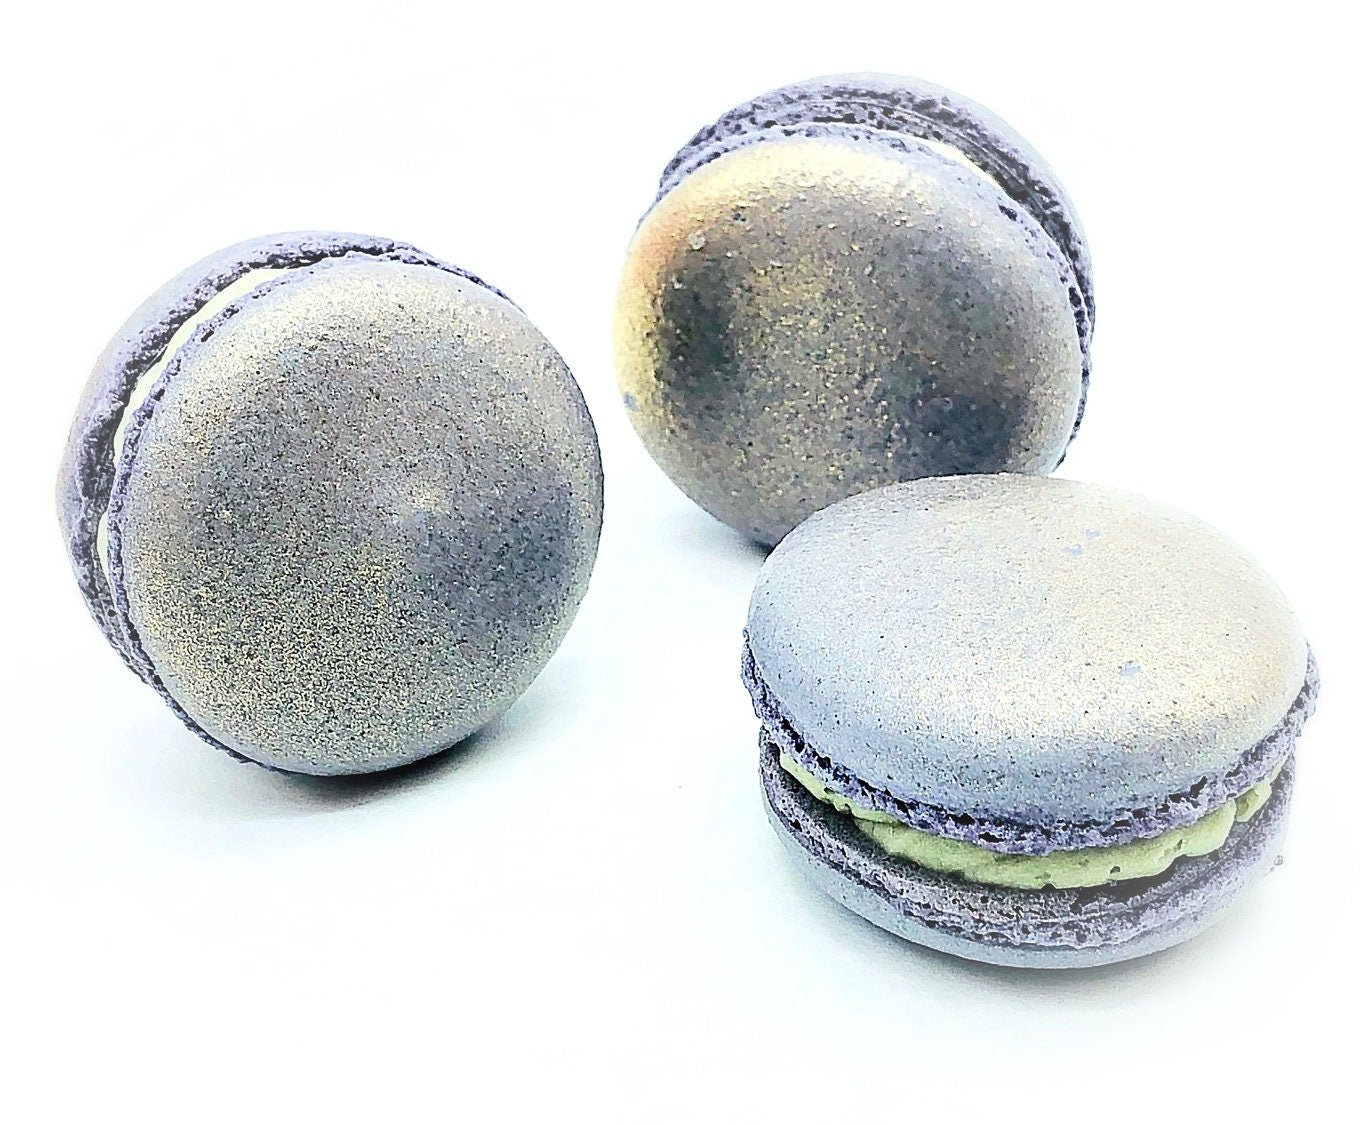 Space Edition Mac | The Venus French Macaron | Available in 6, 12 & 24 - Macaron Centrale6 Pack